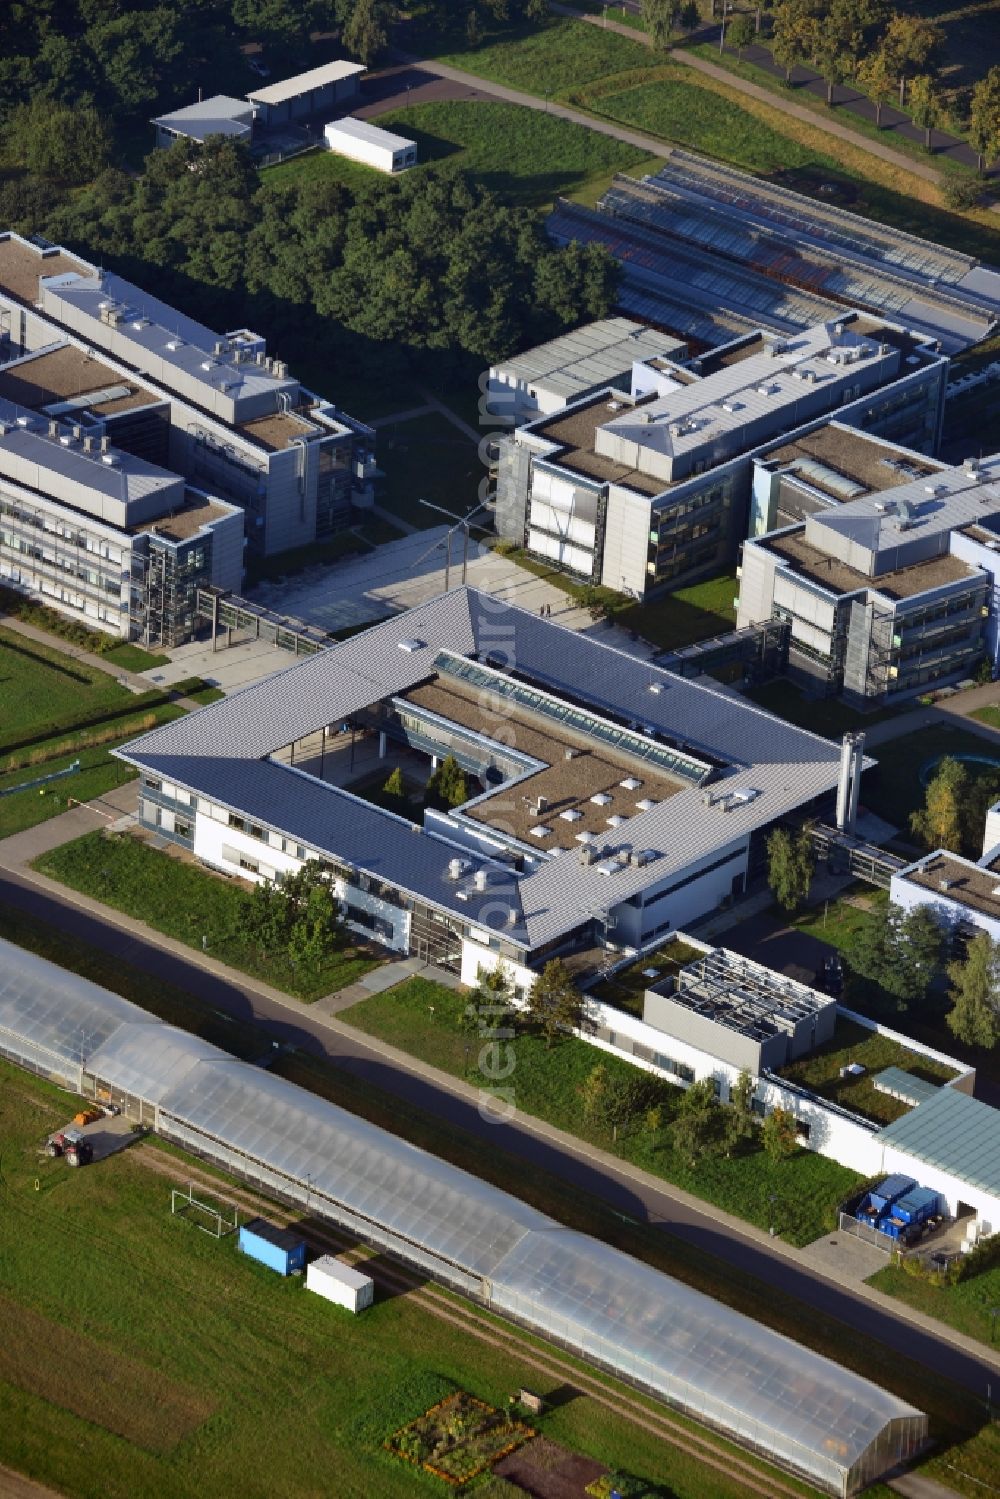 Potsdam from above - View at the site of the Max Planck Society for the Advancement of Science at the science park in the district Golm in Potsdam in the federal state of Brandenburg. The Max Planck Institute for Molecular Plant Physiology, the MPI of Colloids and Interfaces, the MPI for Gravitational Physics and the MPI guest house are located here